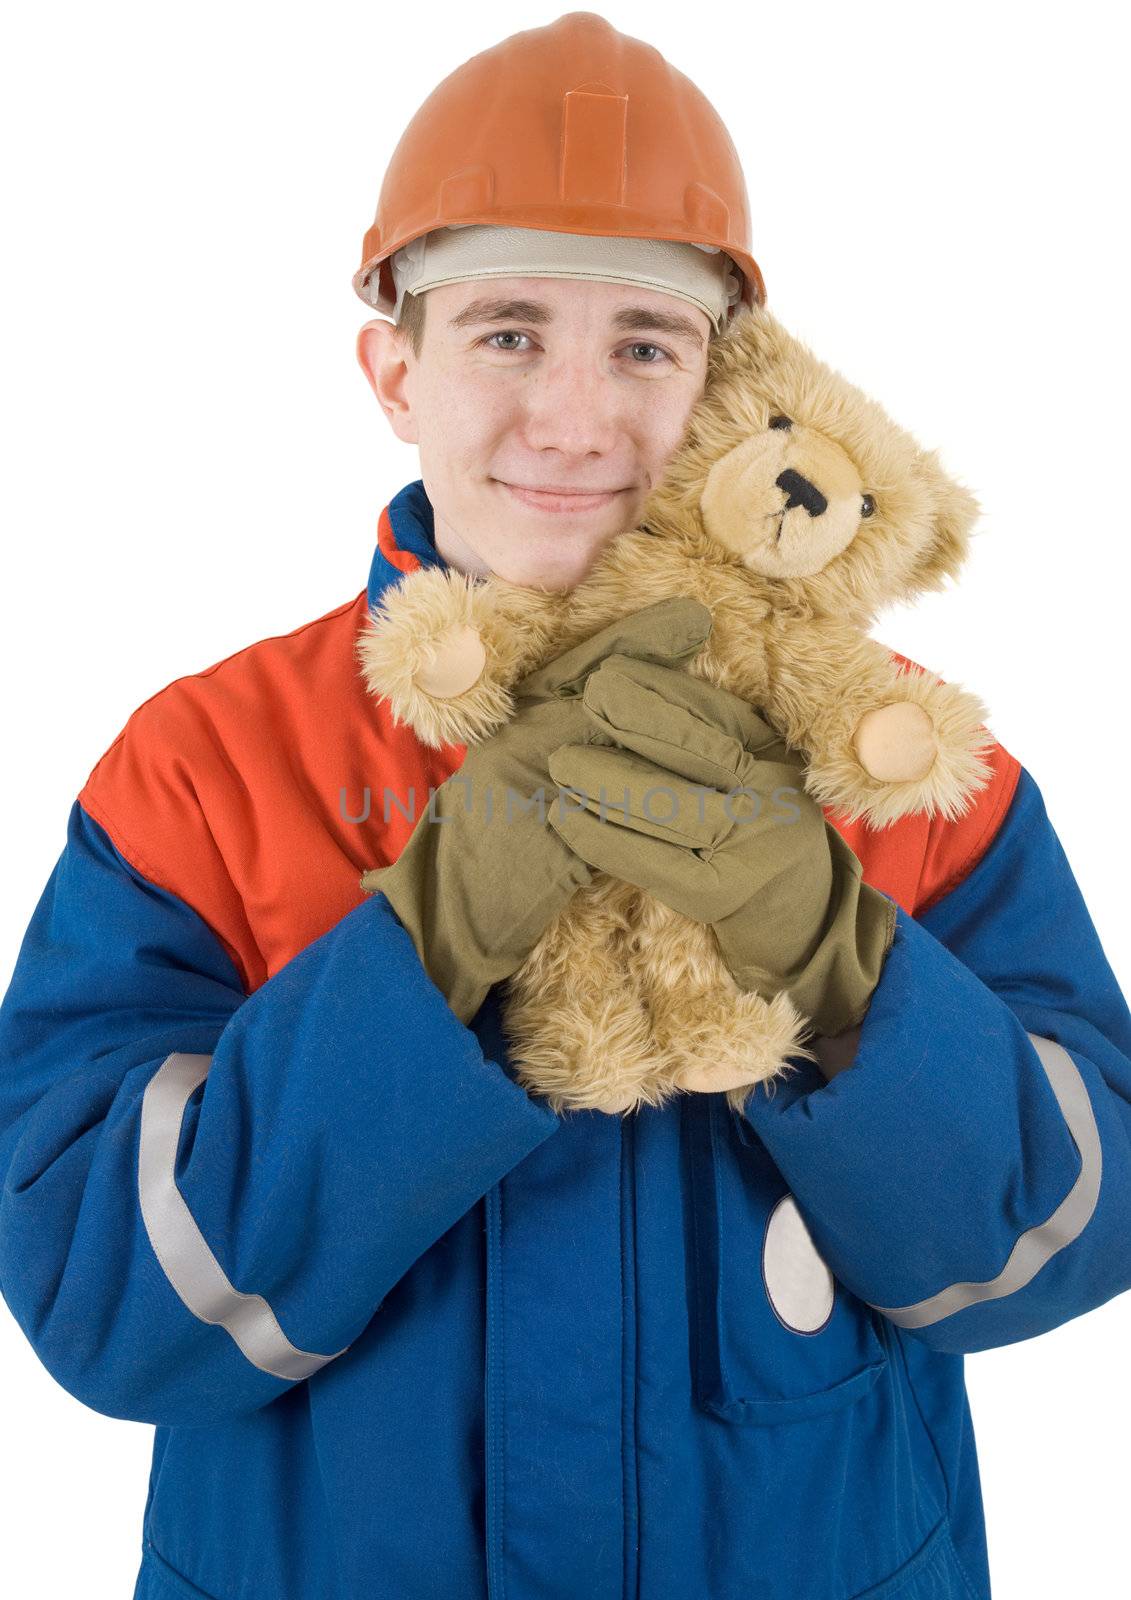 Builder and toy bear by pzaxe